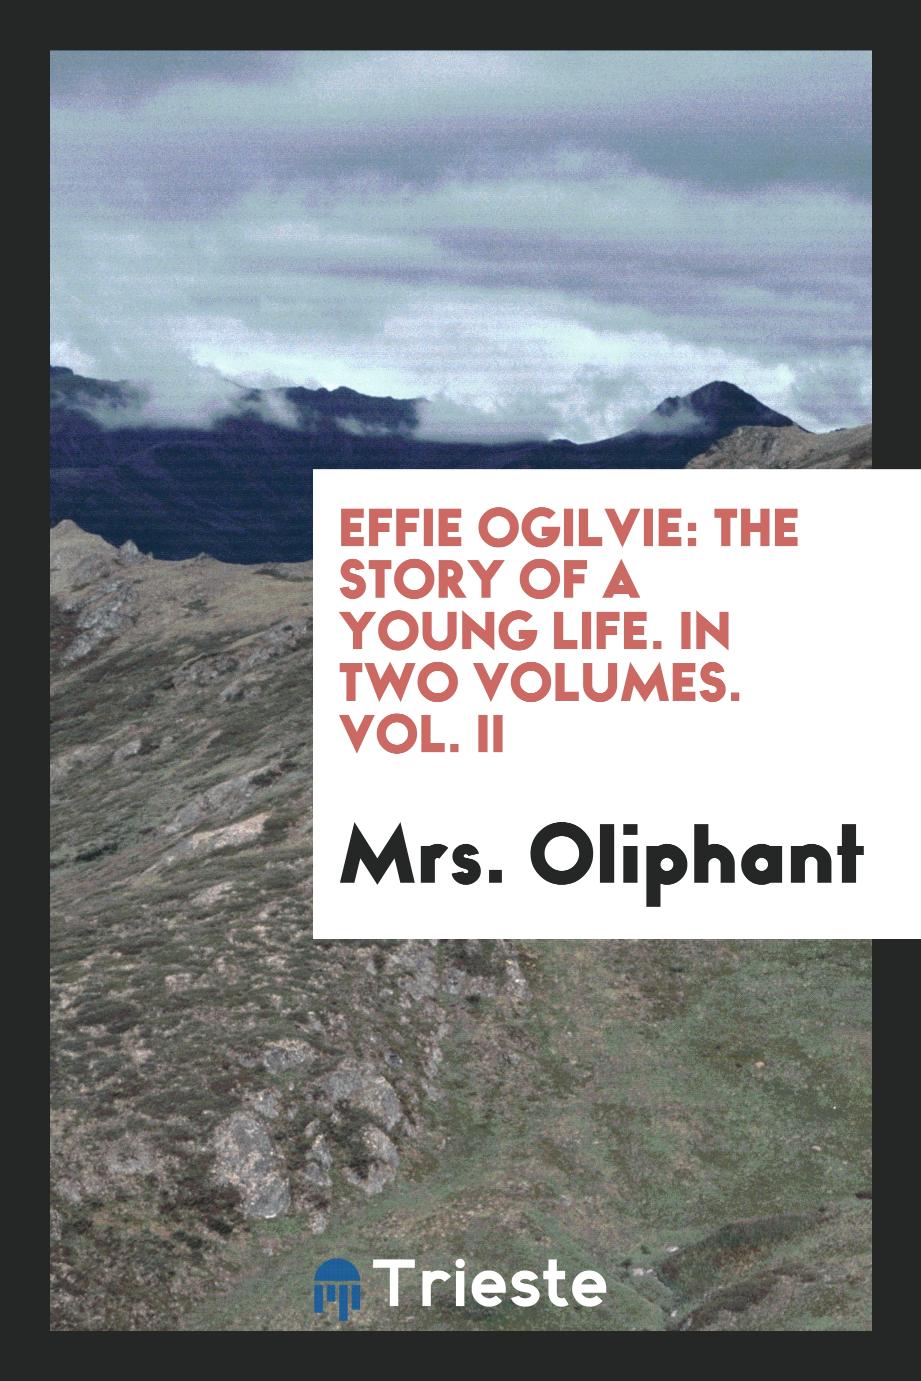 Effie Ogilvie: the story of a young life. In two volumes. Vol. II